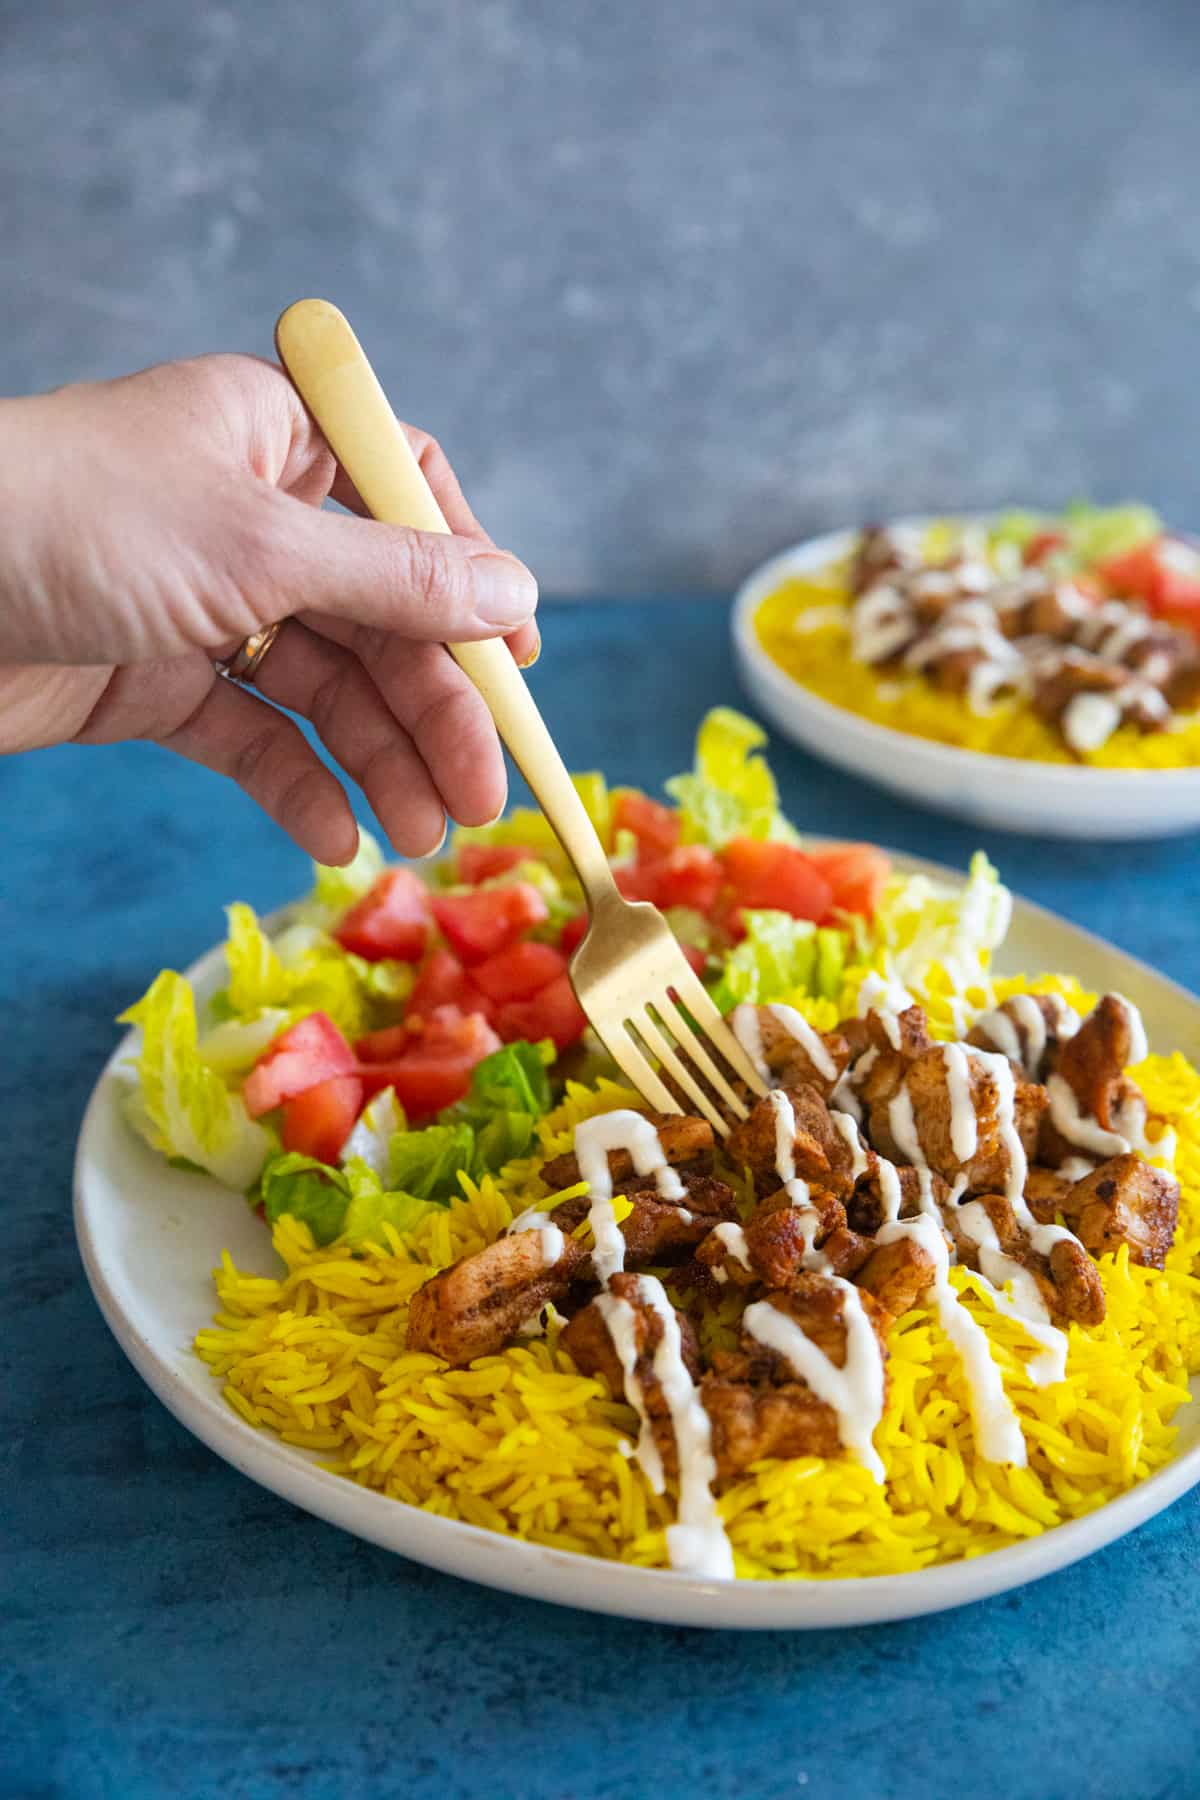 Halal Chicken & Yellow Rice with white sauce